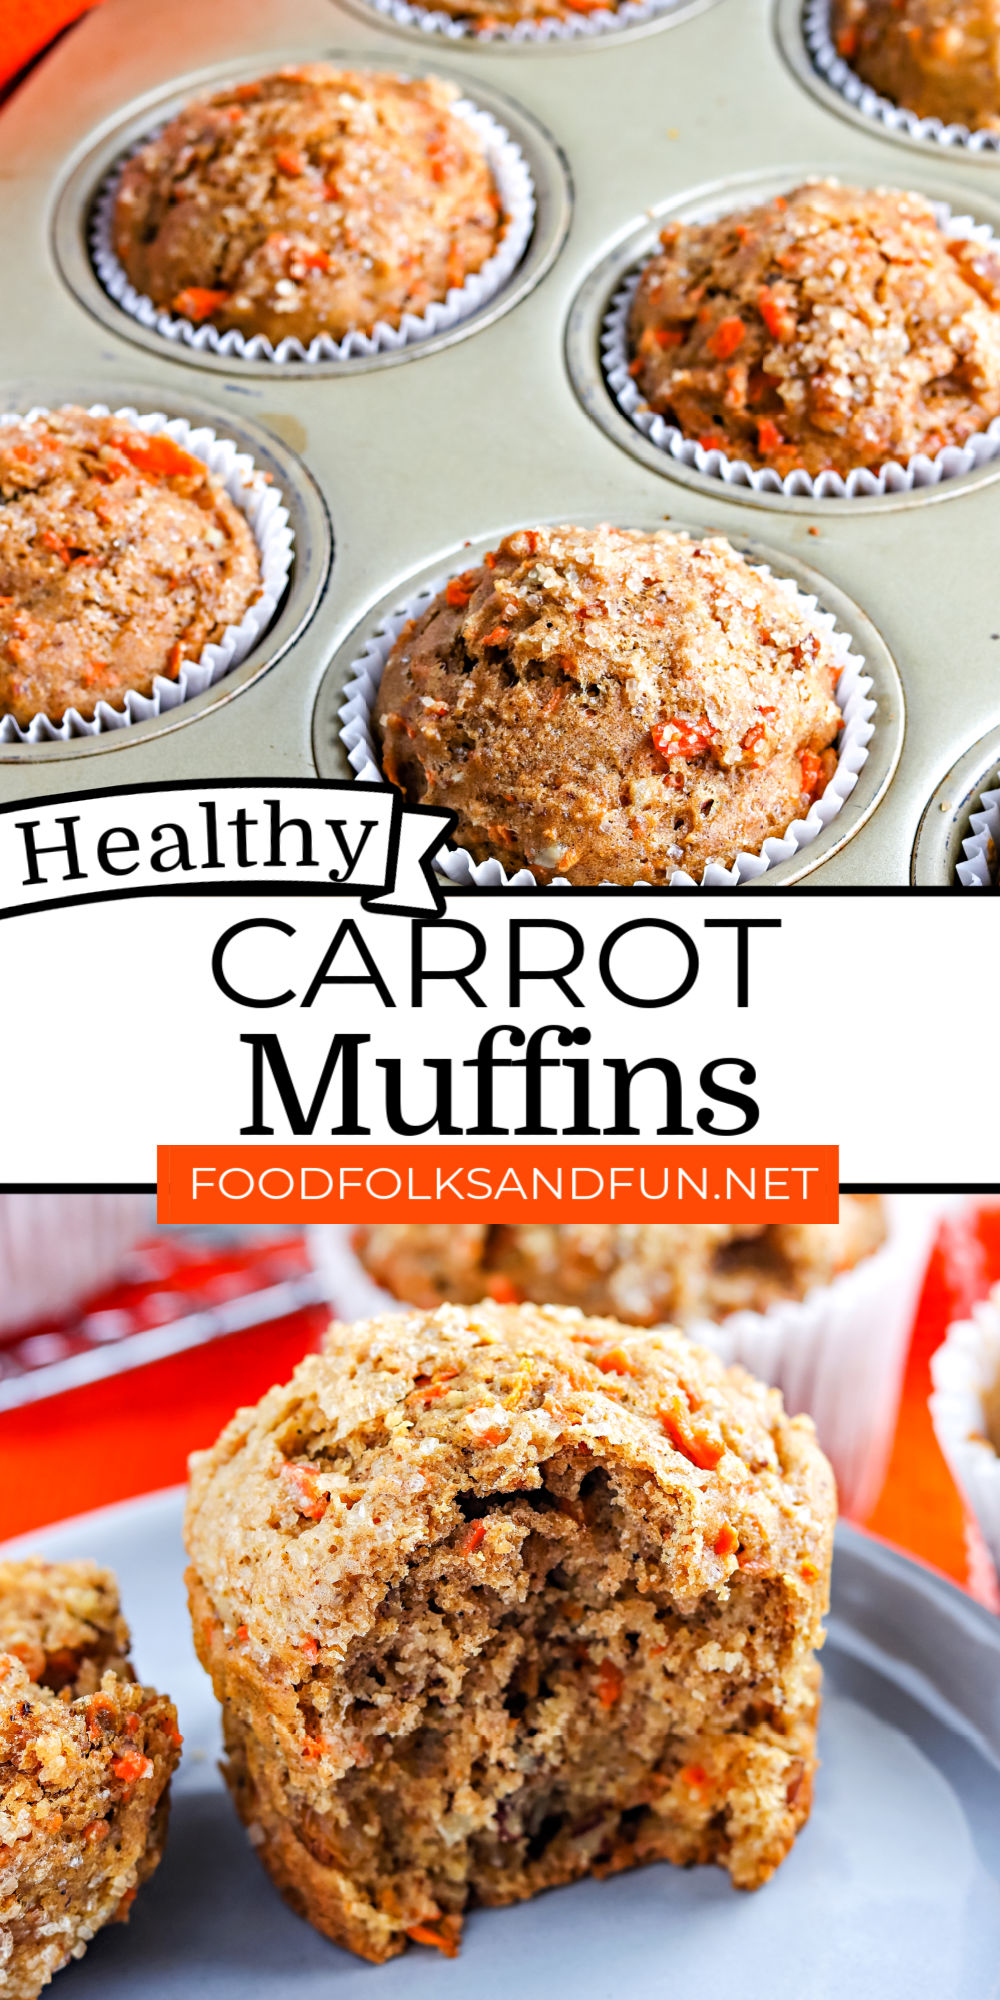 Get your carrot cake fix with this healthy and delicious Carrot Muffins recipe. These muffins are the perfect spring recipe for breakfast on the go! via @foodfolksandfun